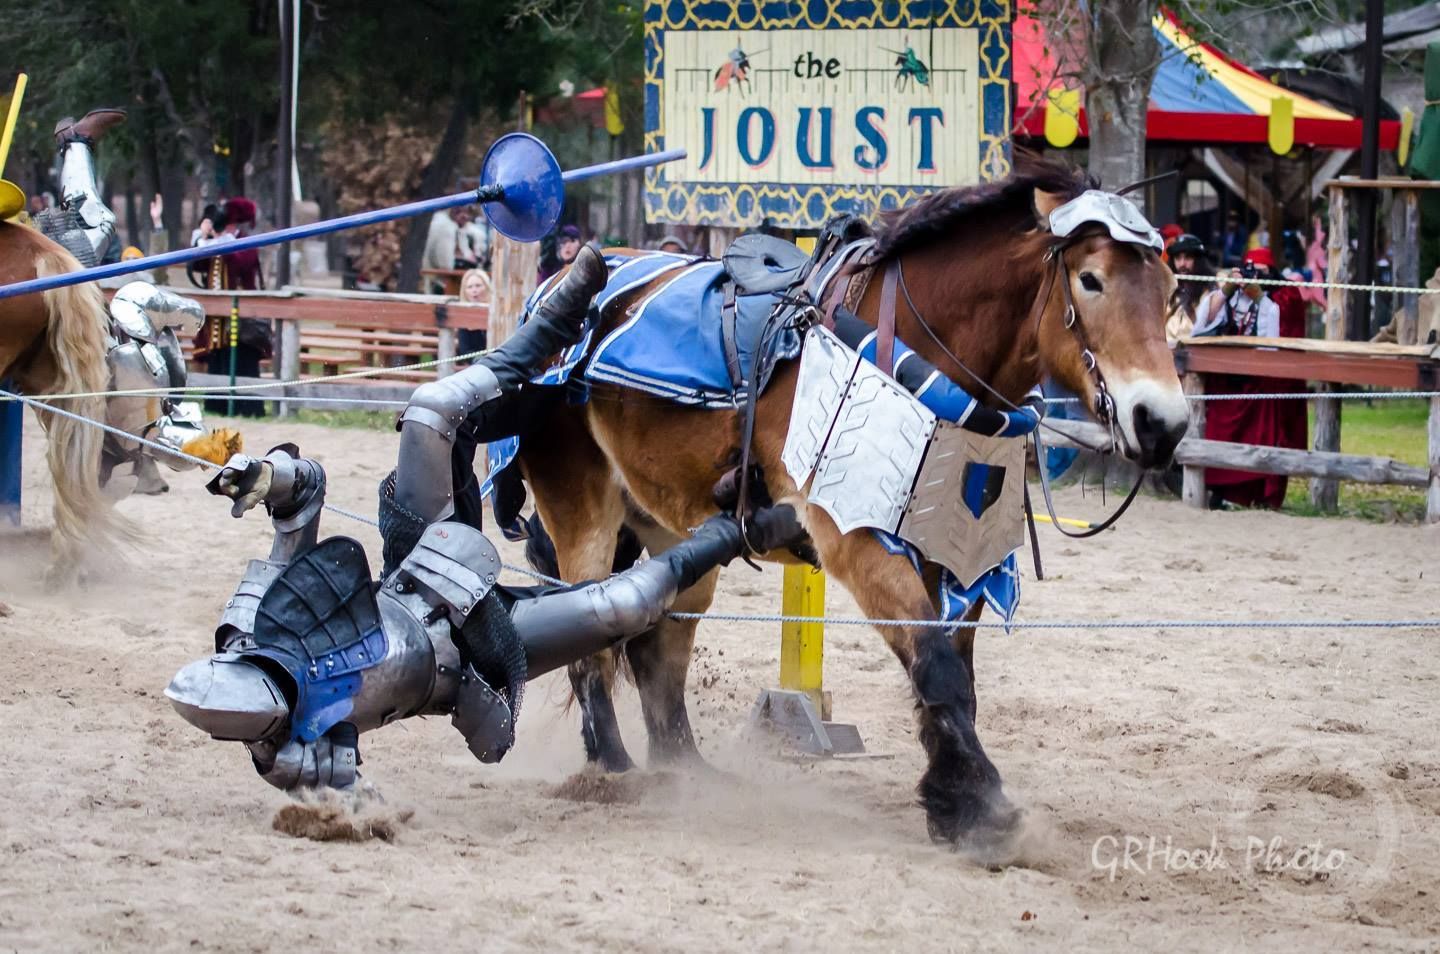 Charlie Andrews(far left) and Mark Desmond(center) unhorse each other during the  Mid-Faire Jousting Tournament at Sherwood Forest Faire 2015(photo by GRHook Photo)